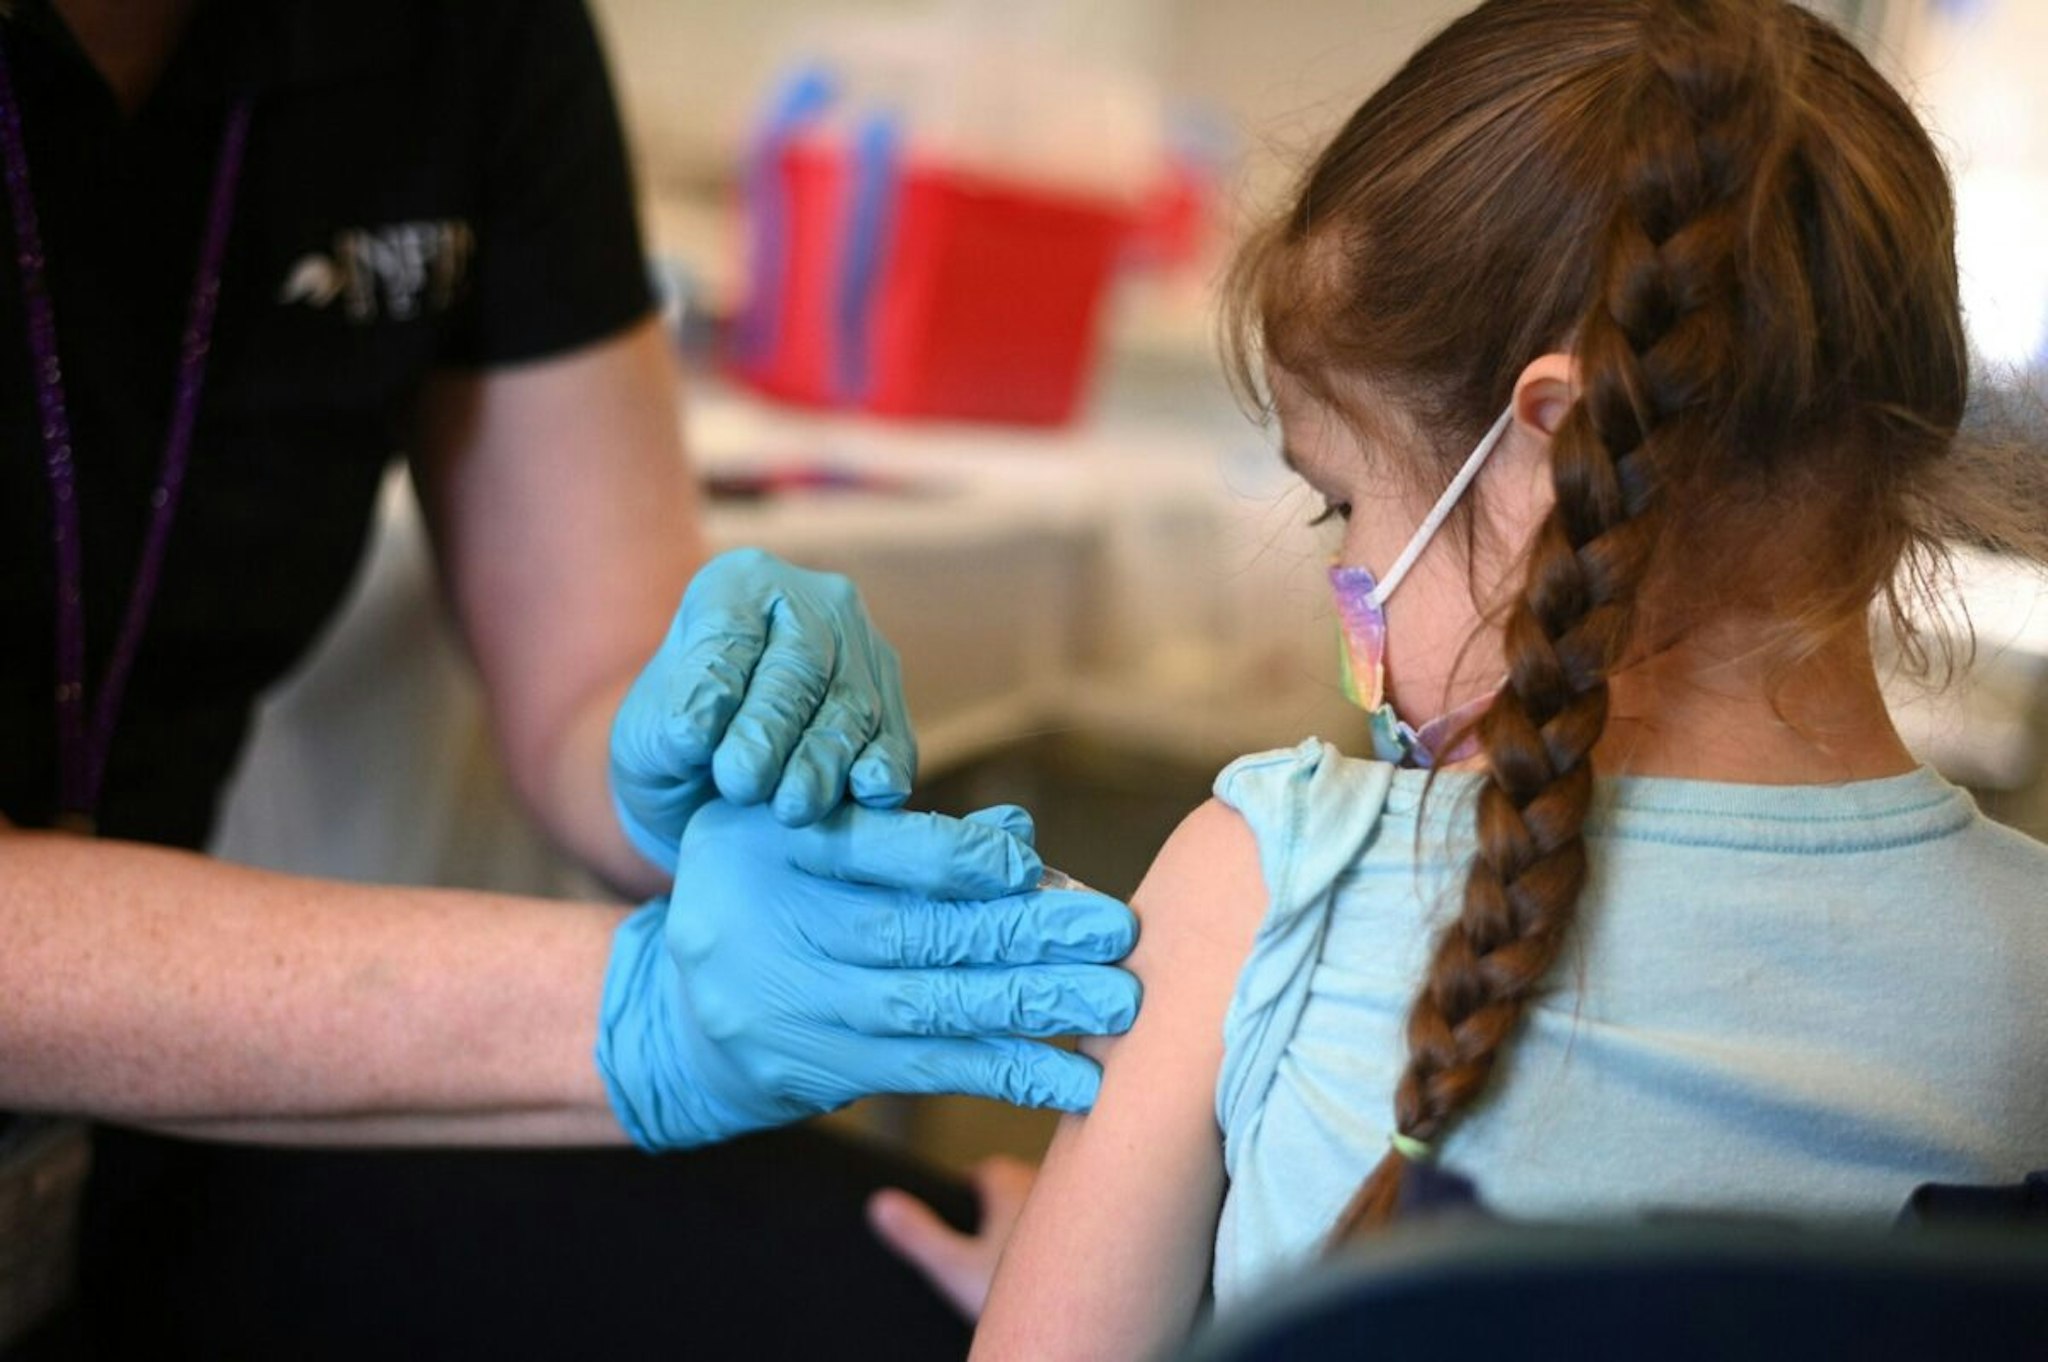 A nurse administers a pediatric dose of the Covid-19 vaccine to a girl at a L.A. Care Health Plan vaccination clinic at Los Angeles Mission College in the Sylmar neighborhood in Los Angeles, California, January 19, 2022. - While cases of Covid-19 hospitalizations and deaths continue to rise in California, officials are seeing early signs that the Omicron surge is slowing. (Photo by Robyn Beck / AFP) (Photo by ROBYN BECK/AFP via Getty Images)